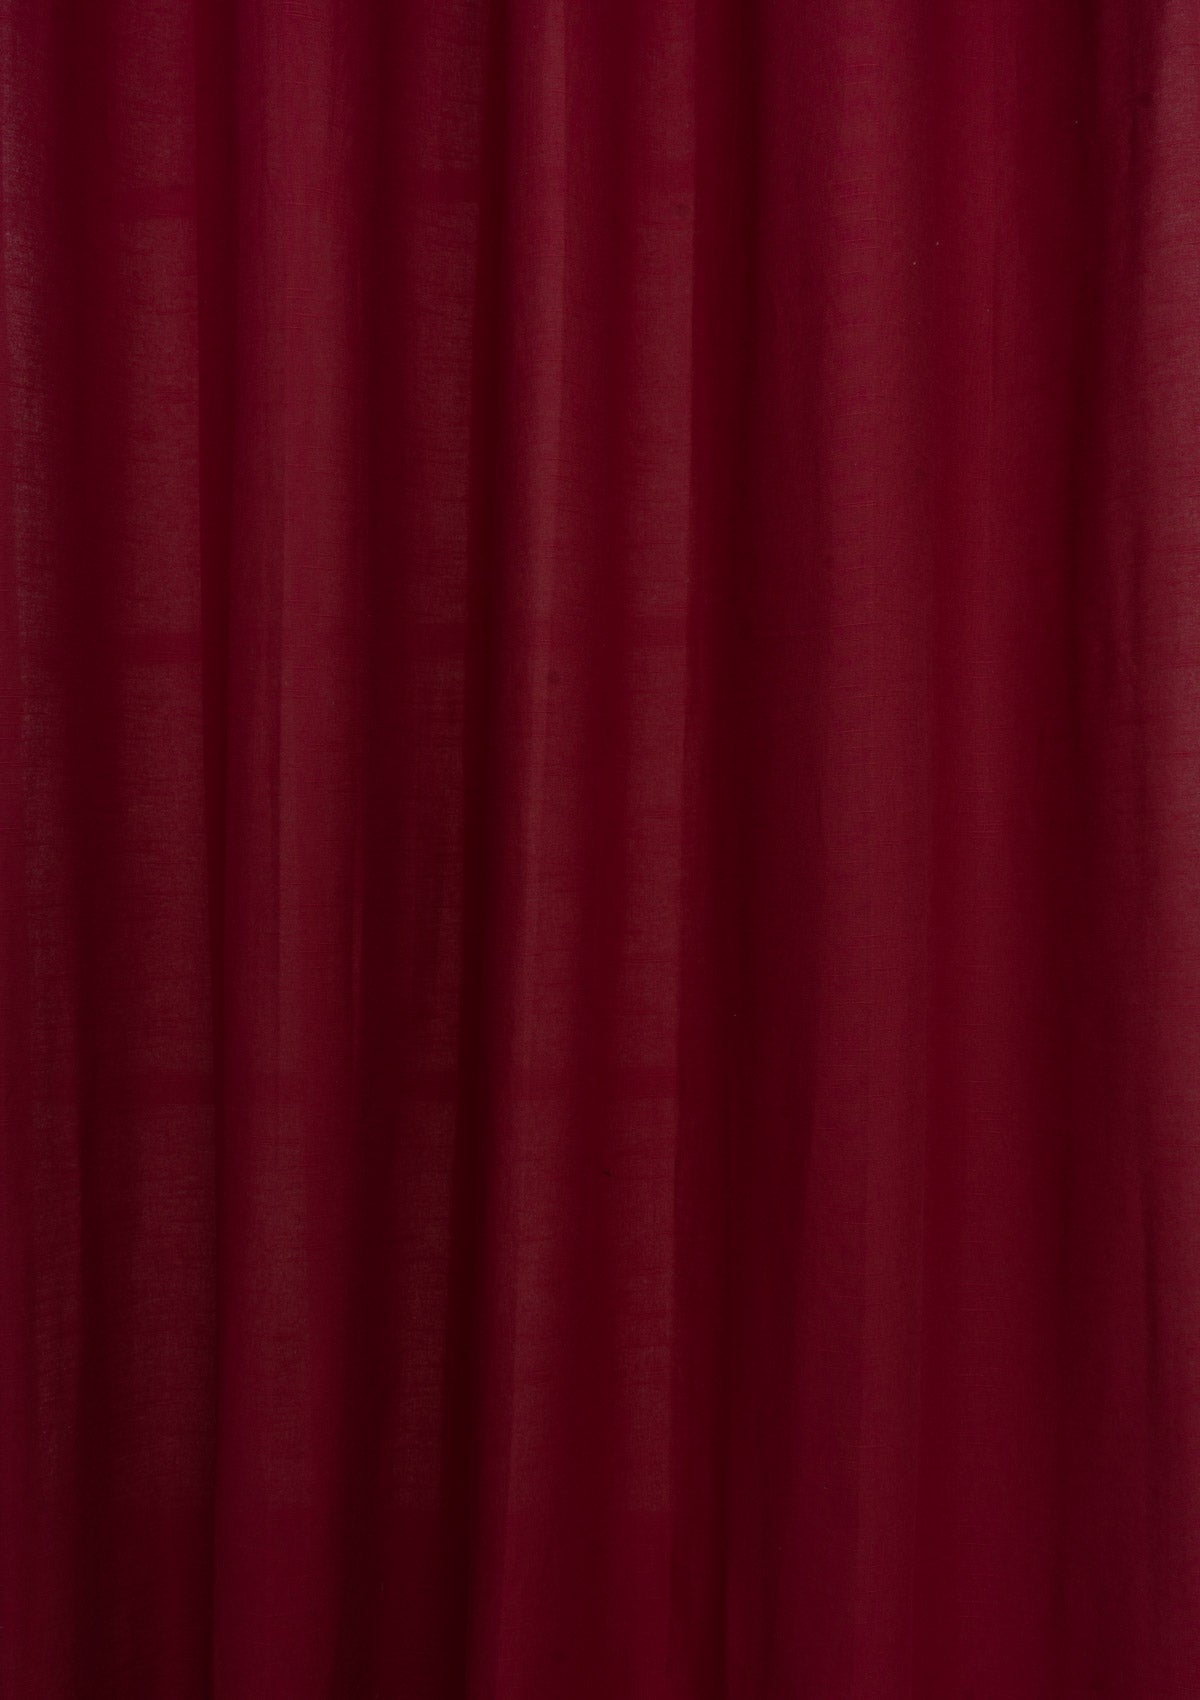 Solid  Wine red 100% cotton plain curtain for bedroom - Room darkening - Pack of 1